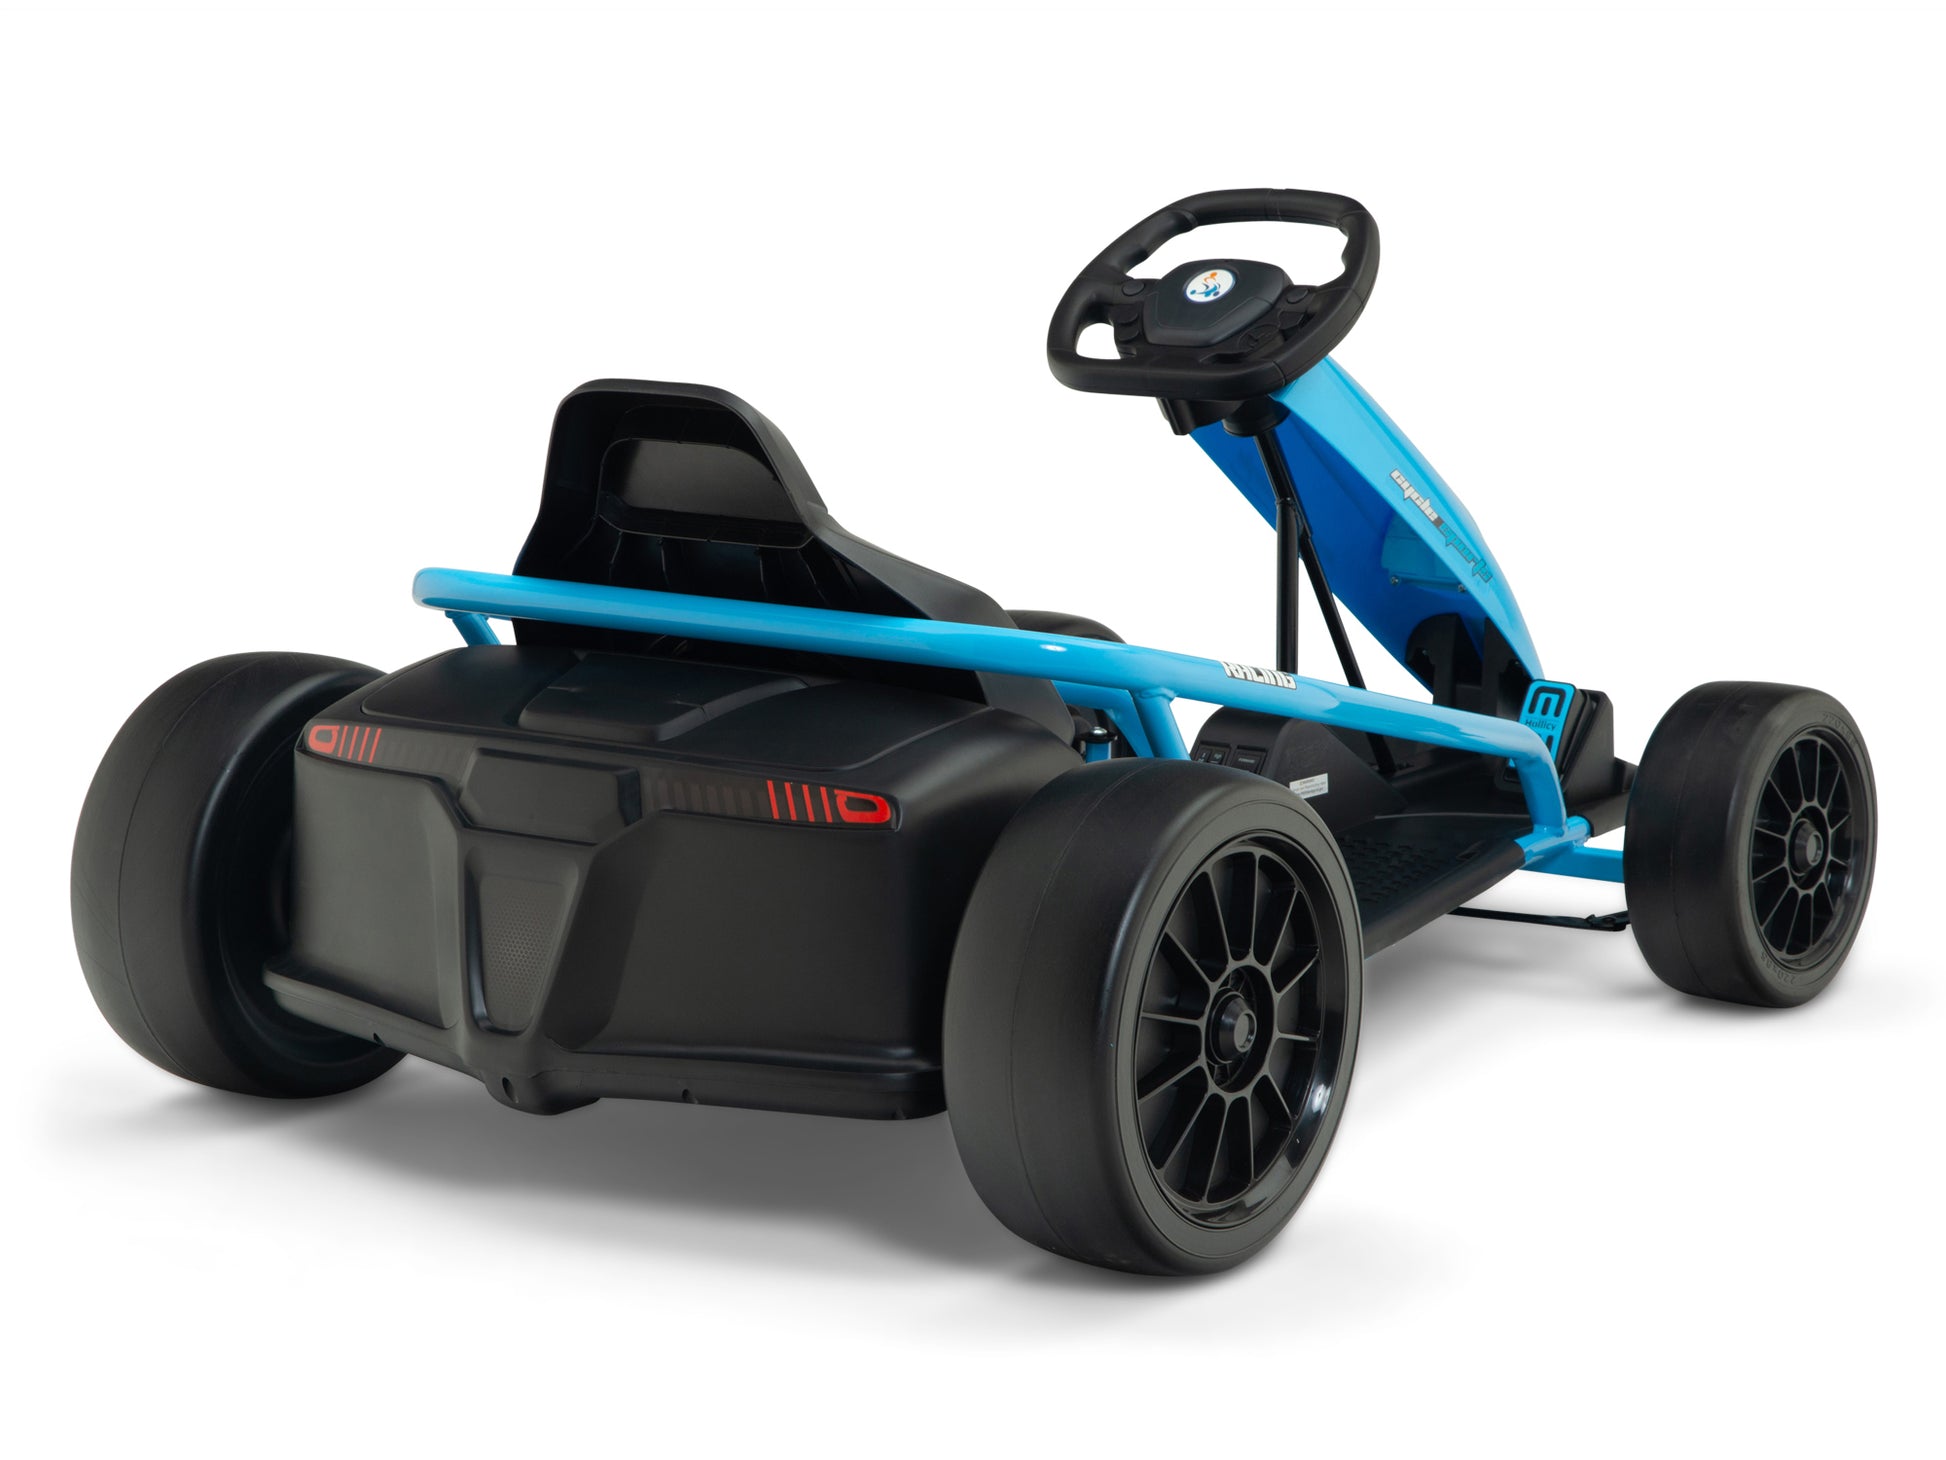  AOKOY Kids Electric Drift Car, 12V Battery Powered Ride On Toy  Car with Remote Control Ride On Sports Car Go Kart for Kids with Drift  Function 3 Speeds LED Headlights, Blue 